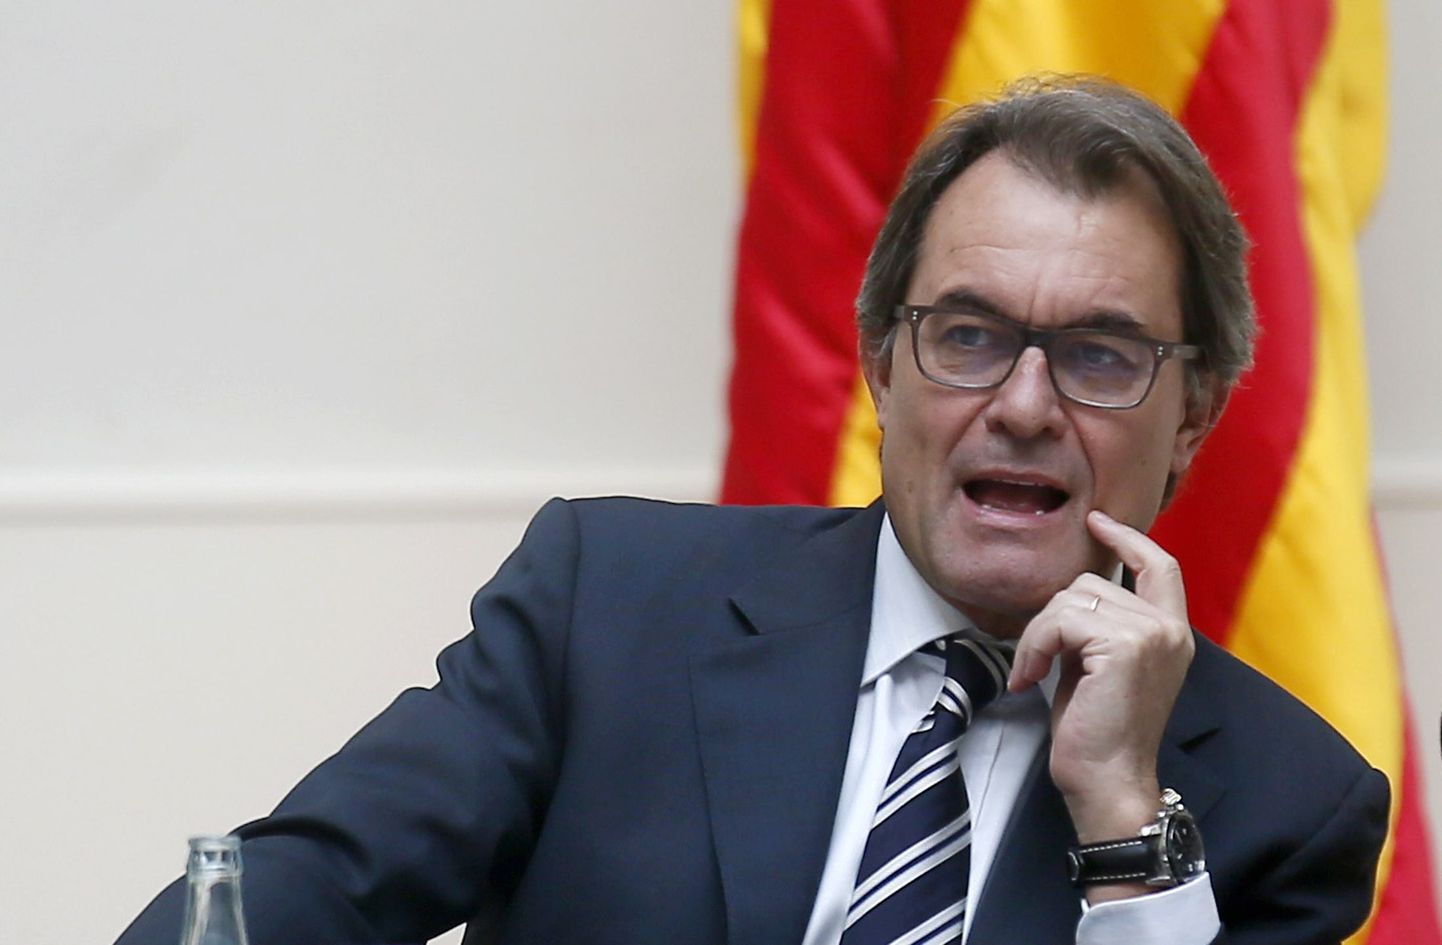 Catalonia's Regional President Artur Mas leads the meeting "Pacte Nacional pel Dret a Decidir" (National Pact For The Right To Decide) with politicians and representatives of social and economic organizations at the Catalan Parliament in Barcelona November 7, 2014. Spain's Constitutional Court on Tuesday suspended a watered-down vote on independence in Catalonia scheduled for Sunday, a move certain to stoke frustration among Catalans, most of whom favor a referendum.  REUTERS/Albert Gea (SPAIN - Tags: POLITICS ELECTIONS)